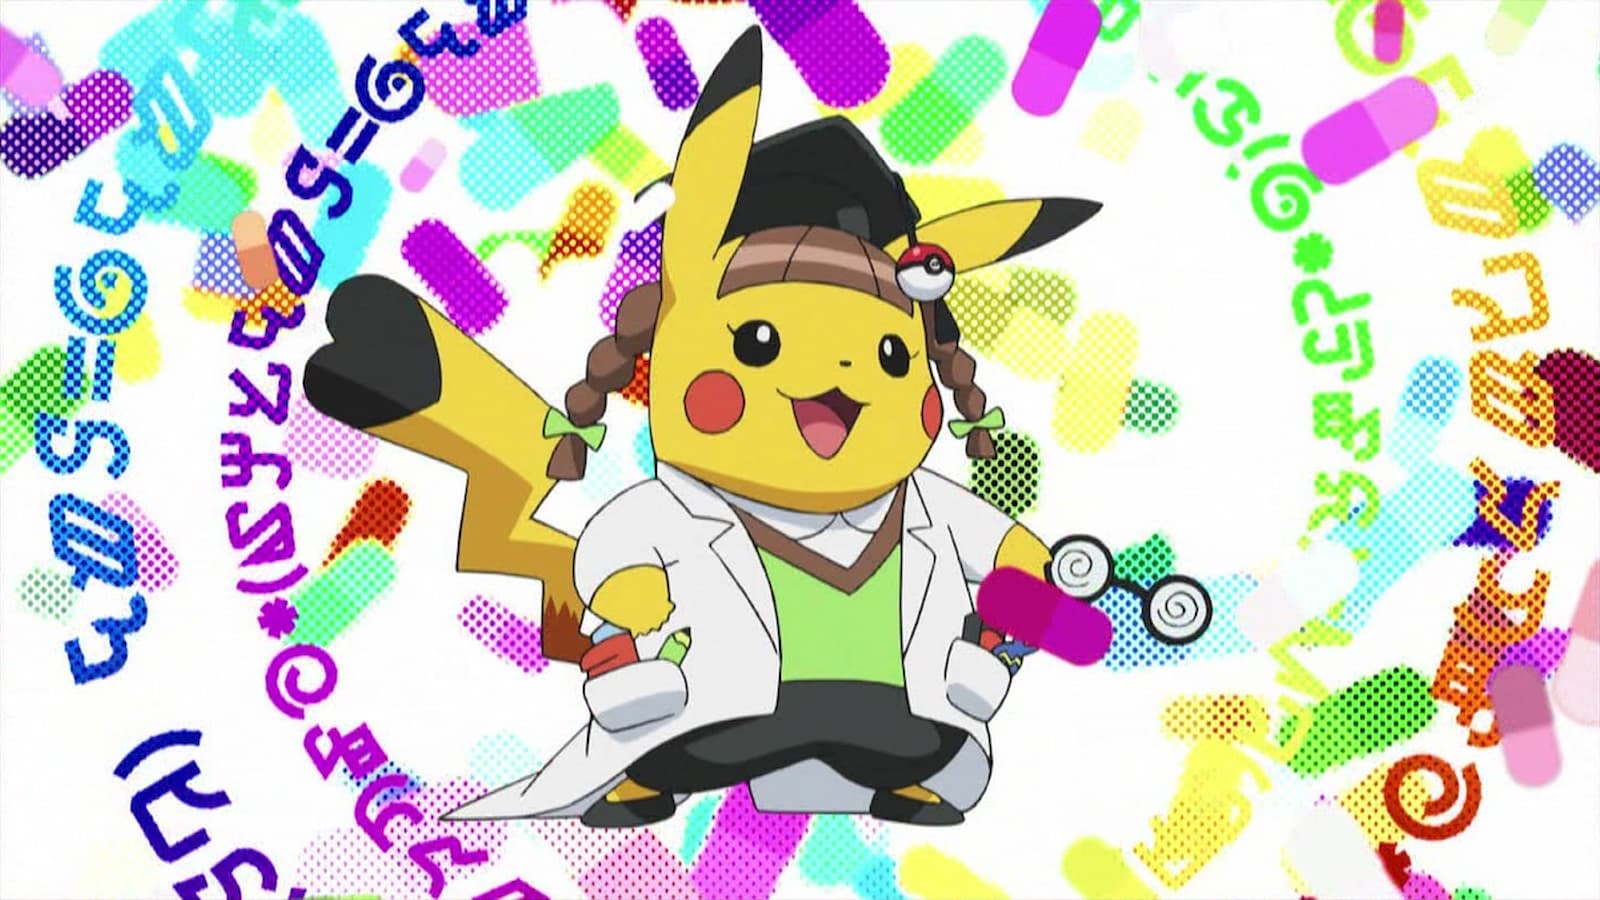 Cosplay PHD Pikachu from the Pokemon anime